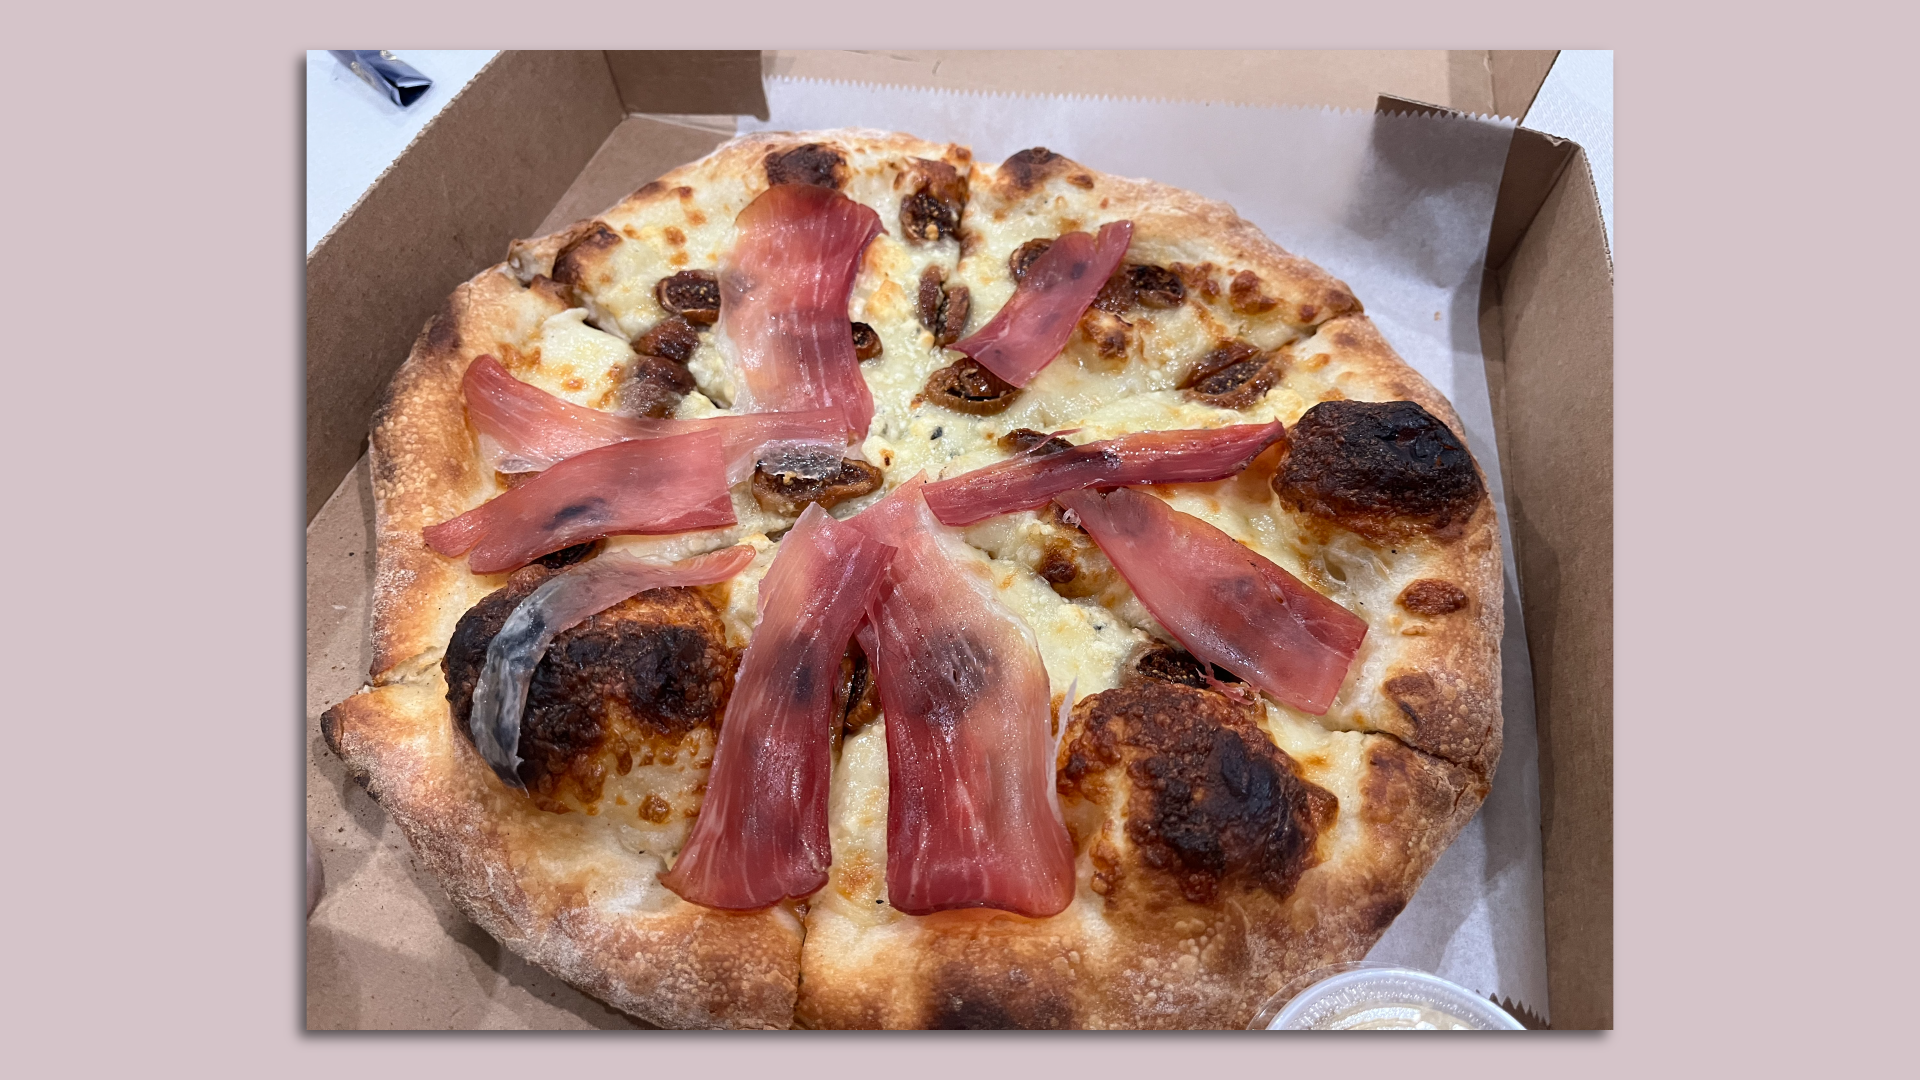 A Crust Pizza with proscuitto, figs and blue cheese.